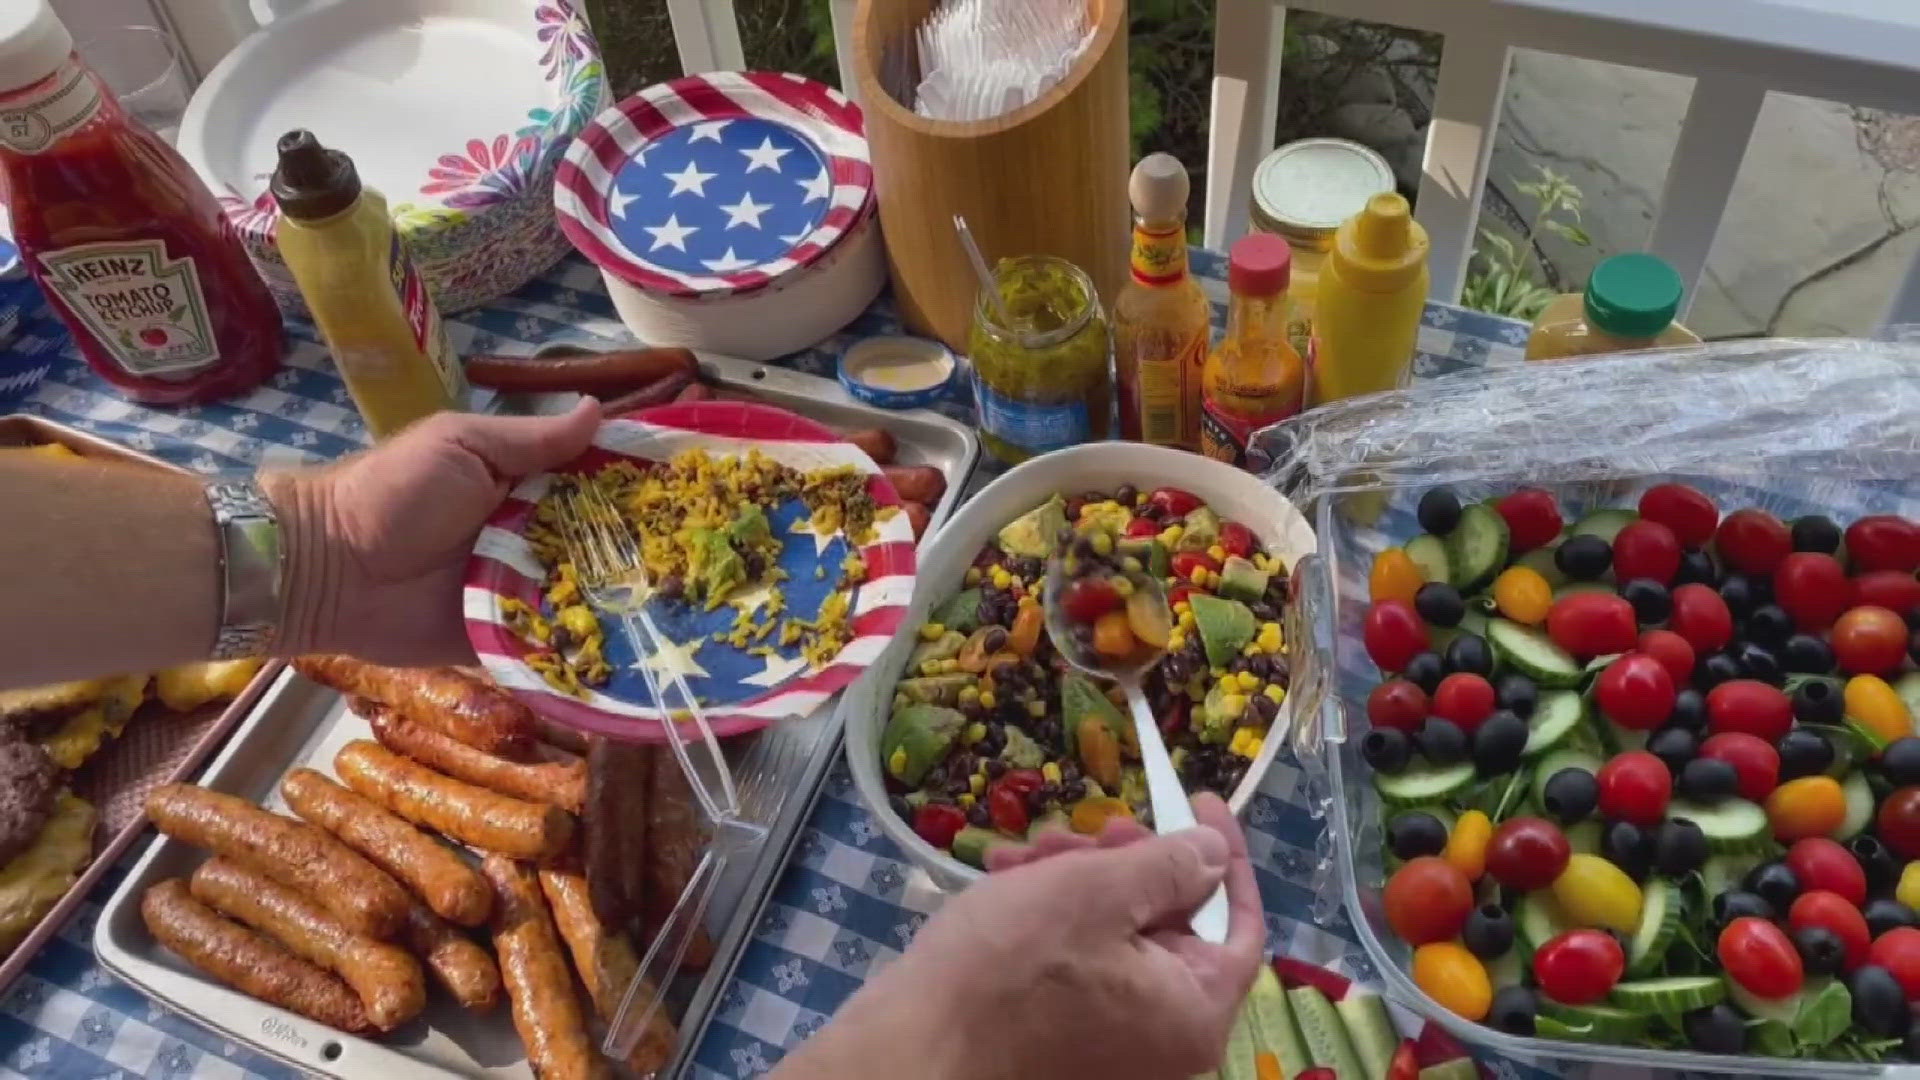 Holiday picnics and cookouts are a summer tradition. But the warm weather can quickly turn tasty treats into nasty bacteria.